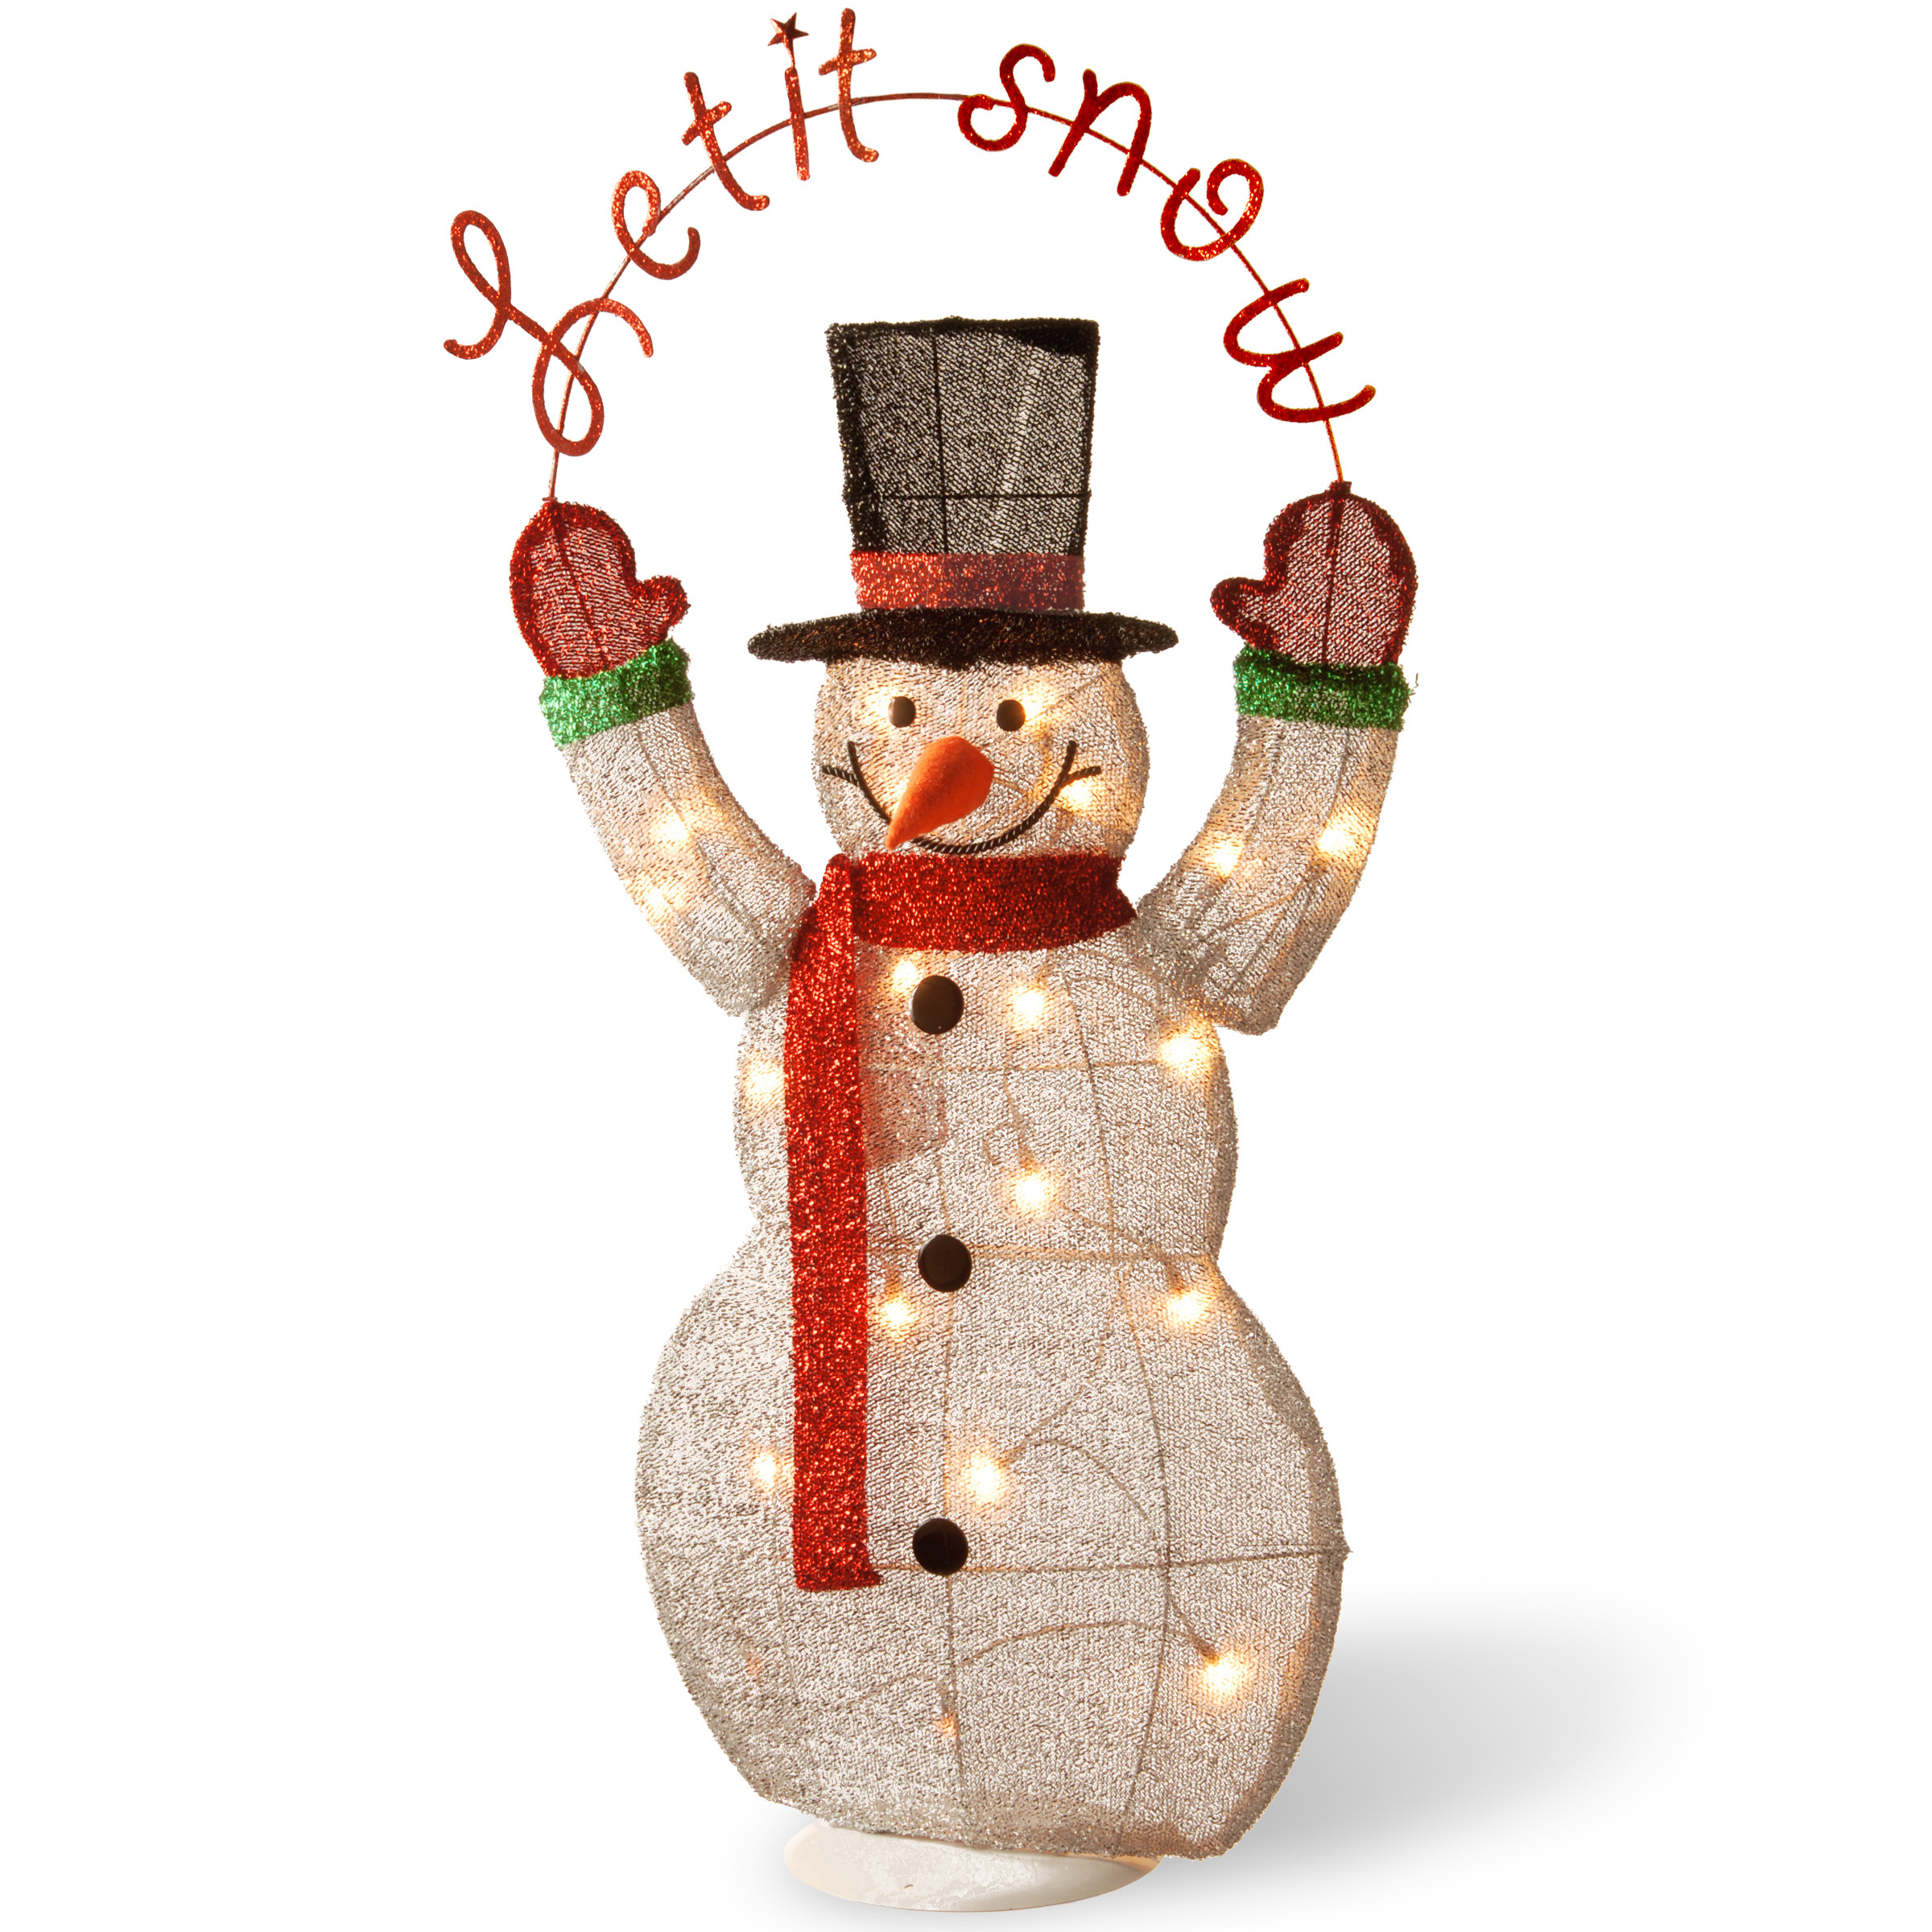 Lighted Indoor Christmas Decorations
 Lighted Christmas Snowman Outdoor Indoor Decoration Yard